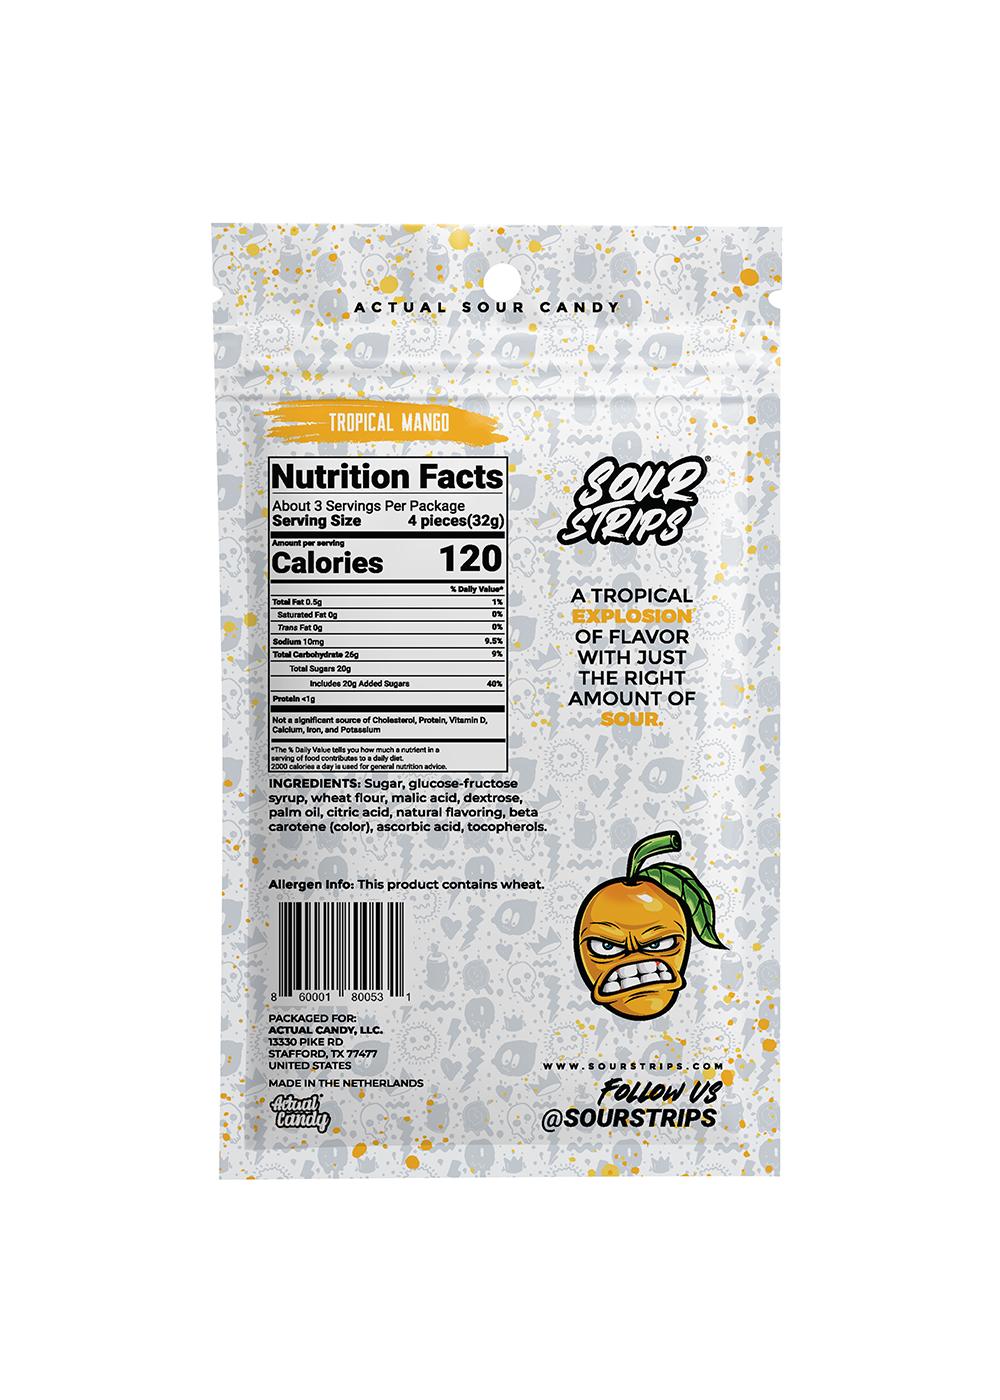 Sour Strips Tropical Mango Candy; image 2 of 2